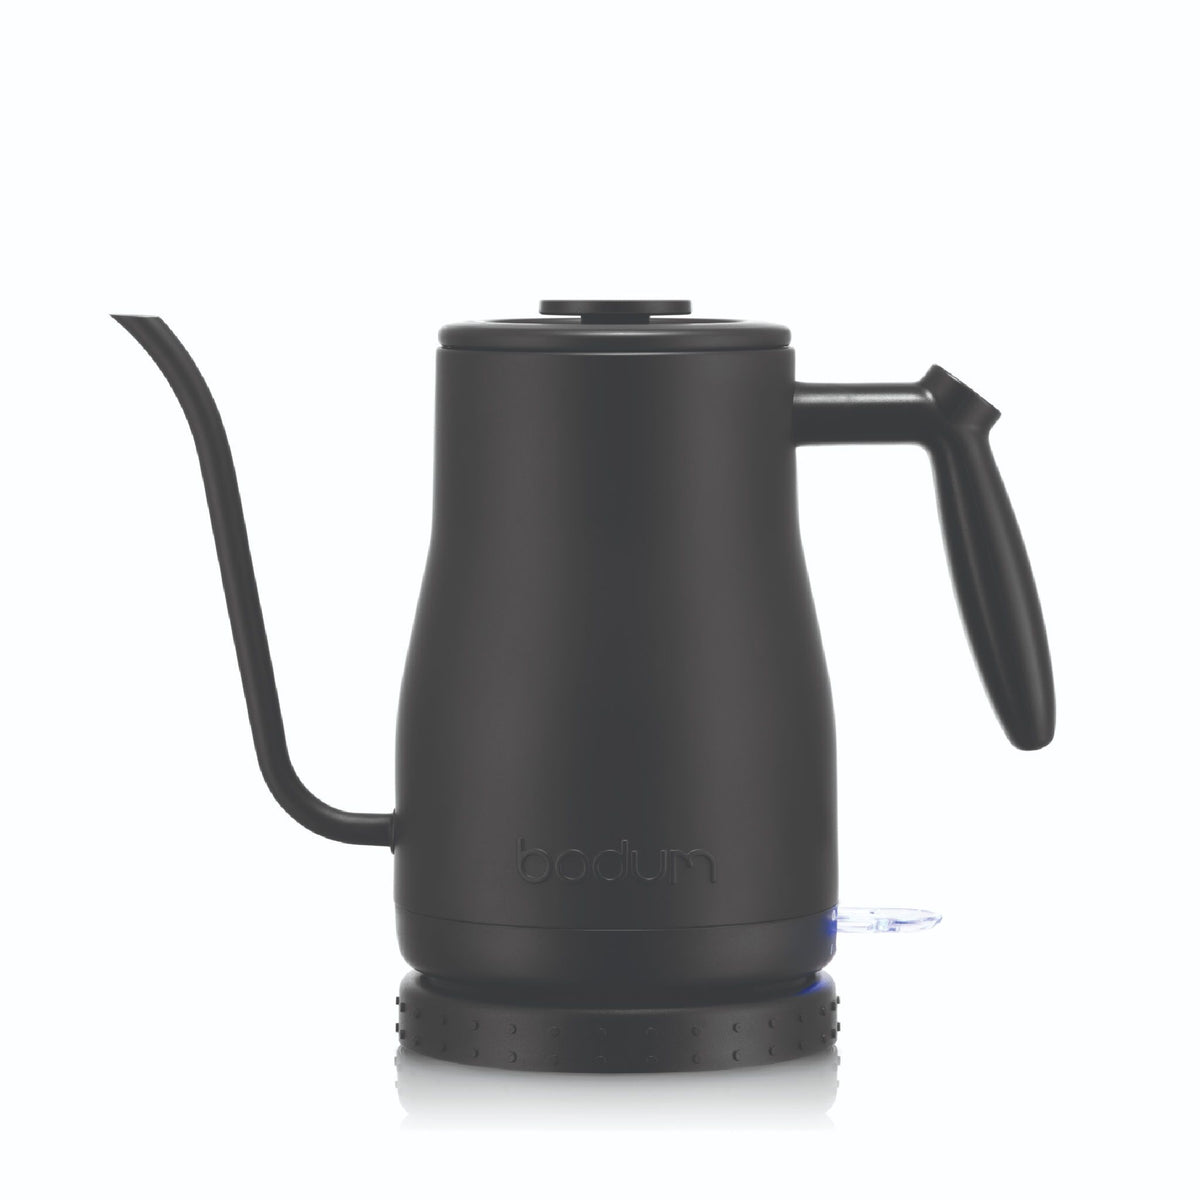 Extending the Life of Your Bodum Cordless Electric Kettle - I Need Coffee